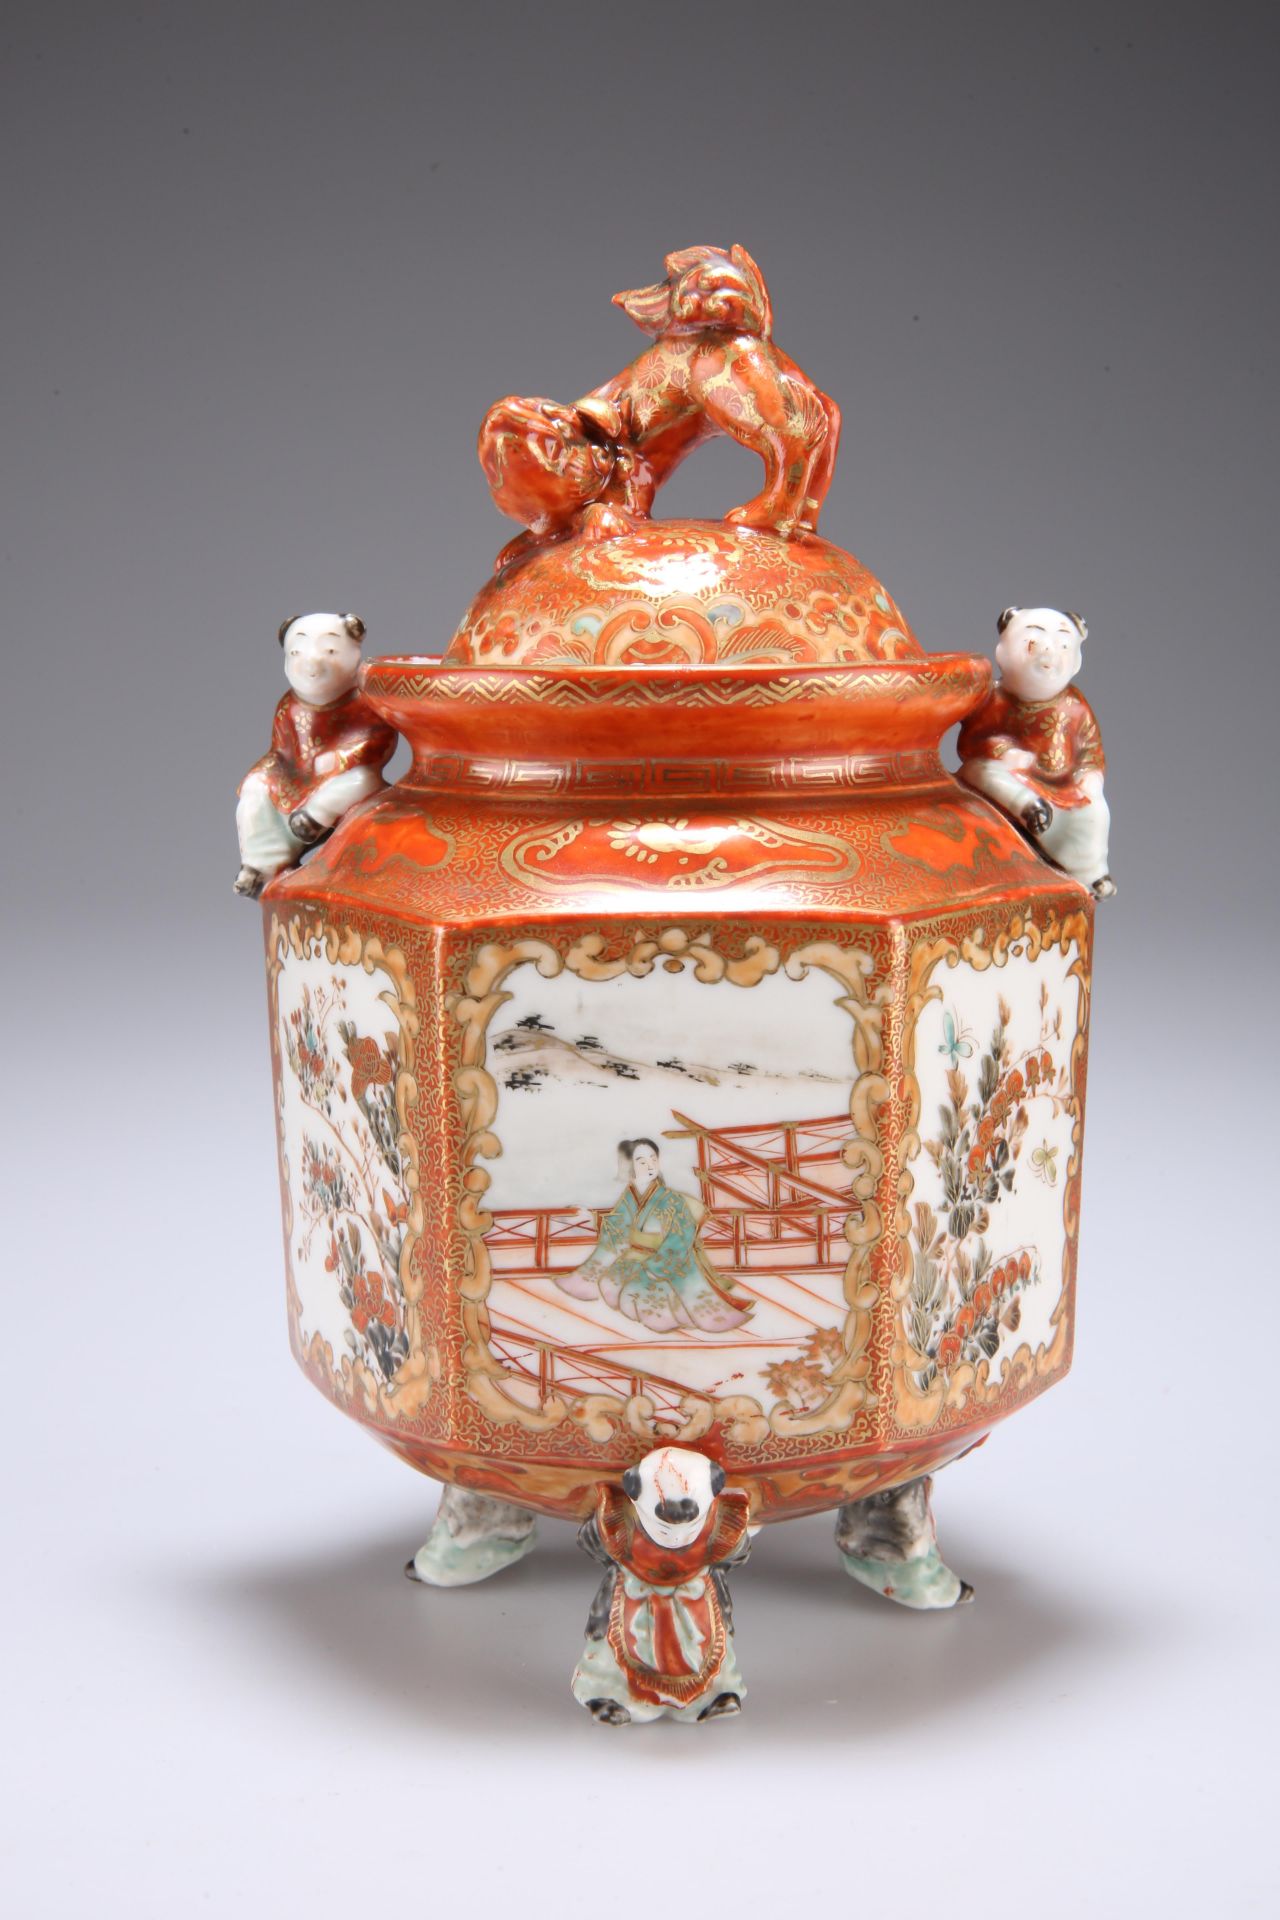 A JAPANESE KUTANI KORO, LATE 19TH CENTURY, octagonal, the domed cover with shishi-form knop, the